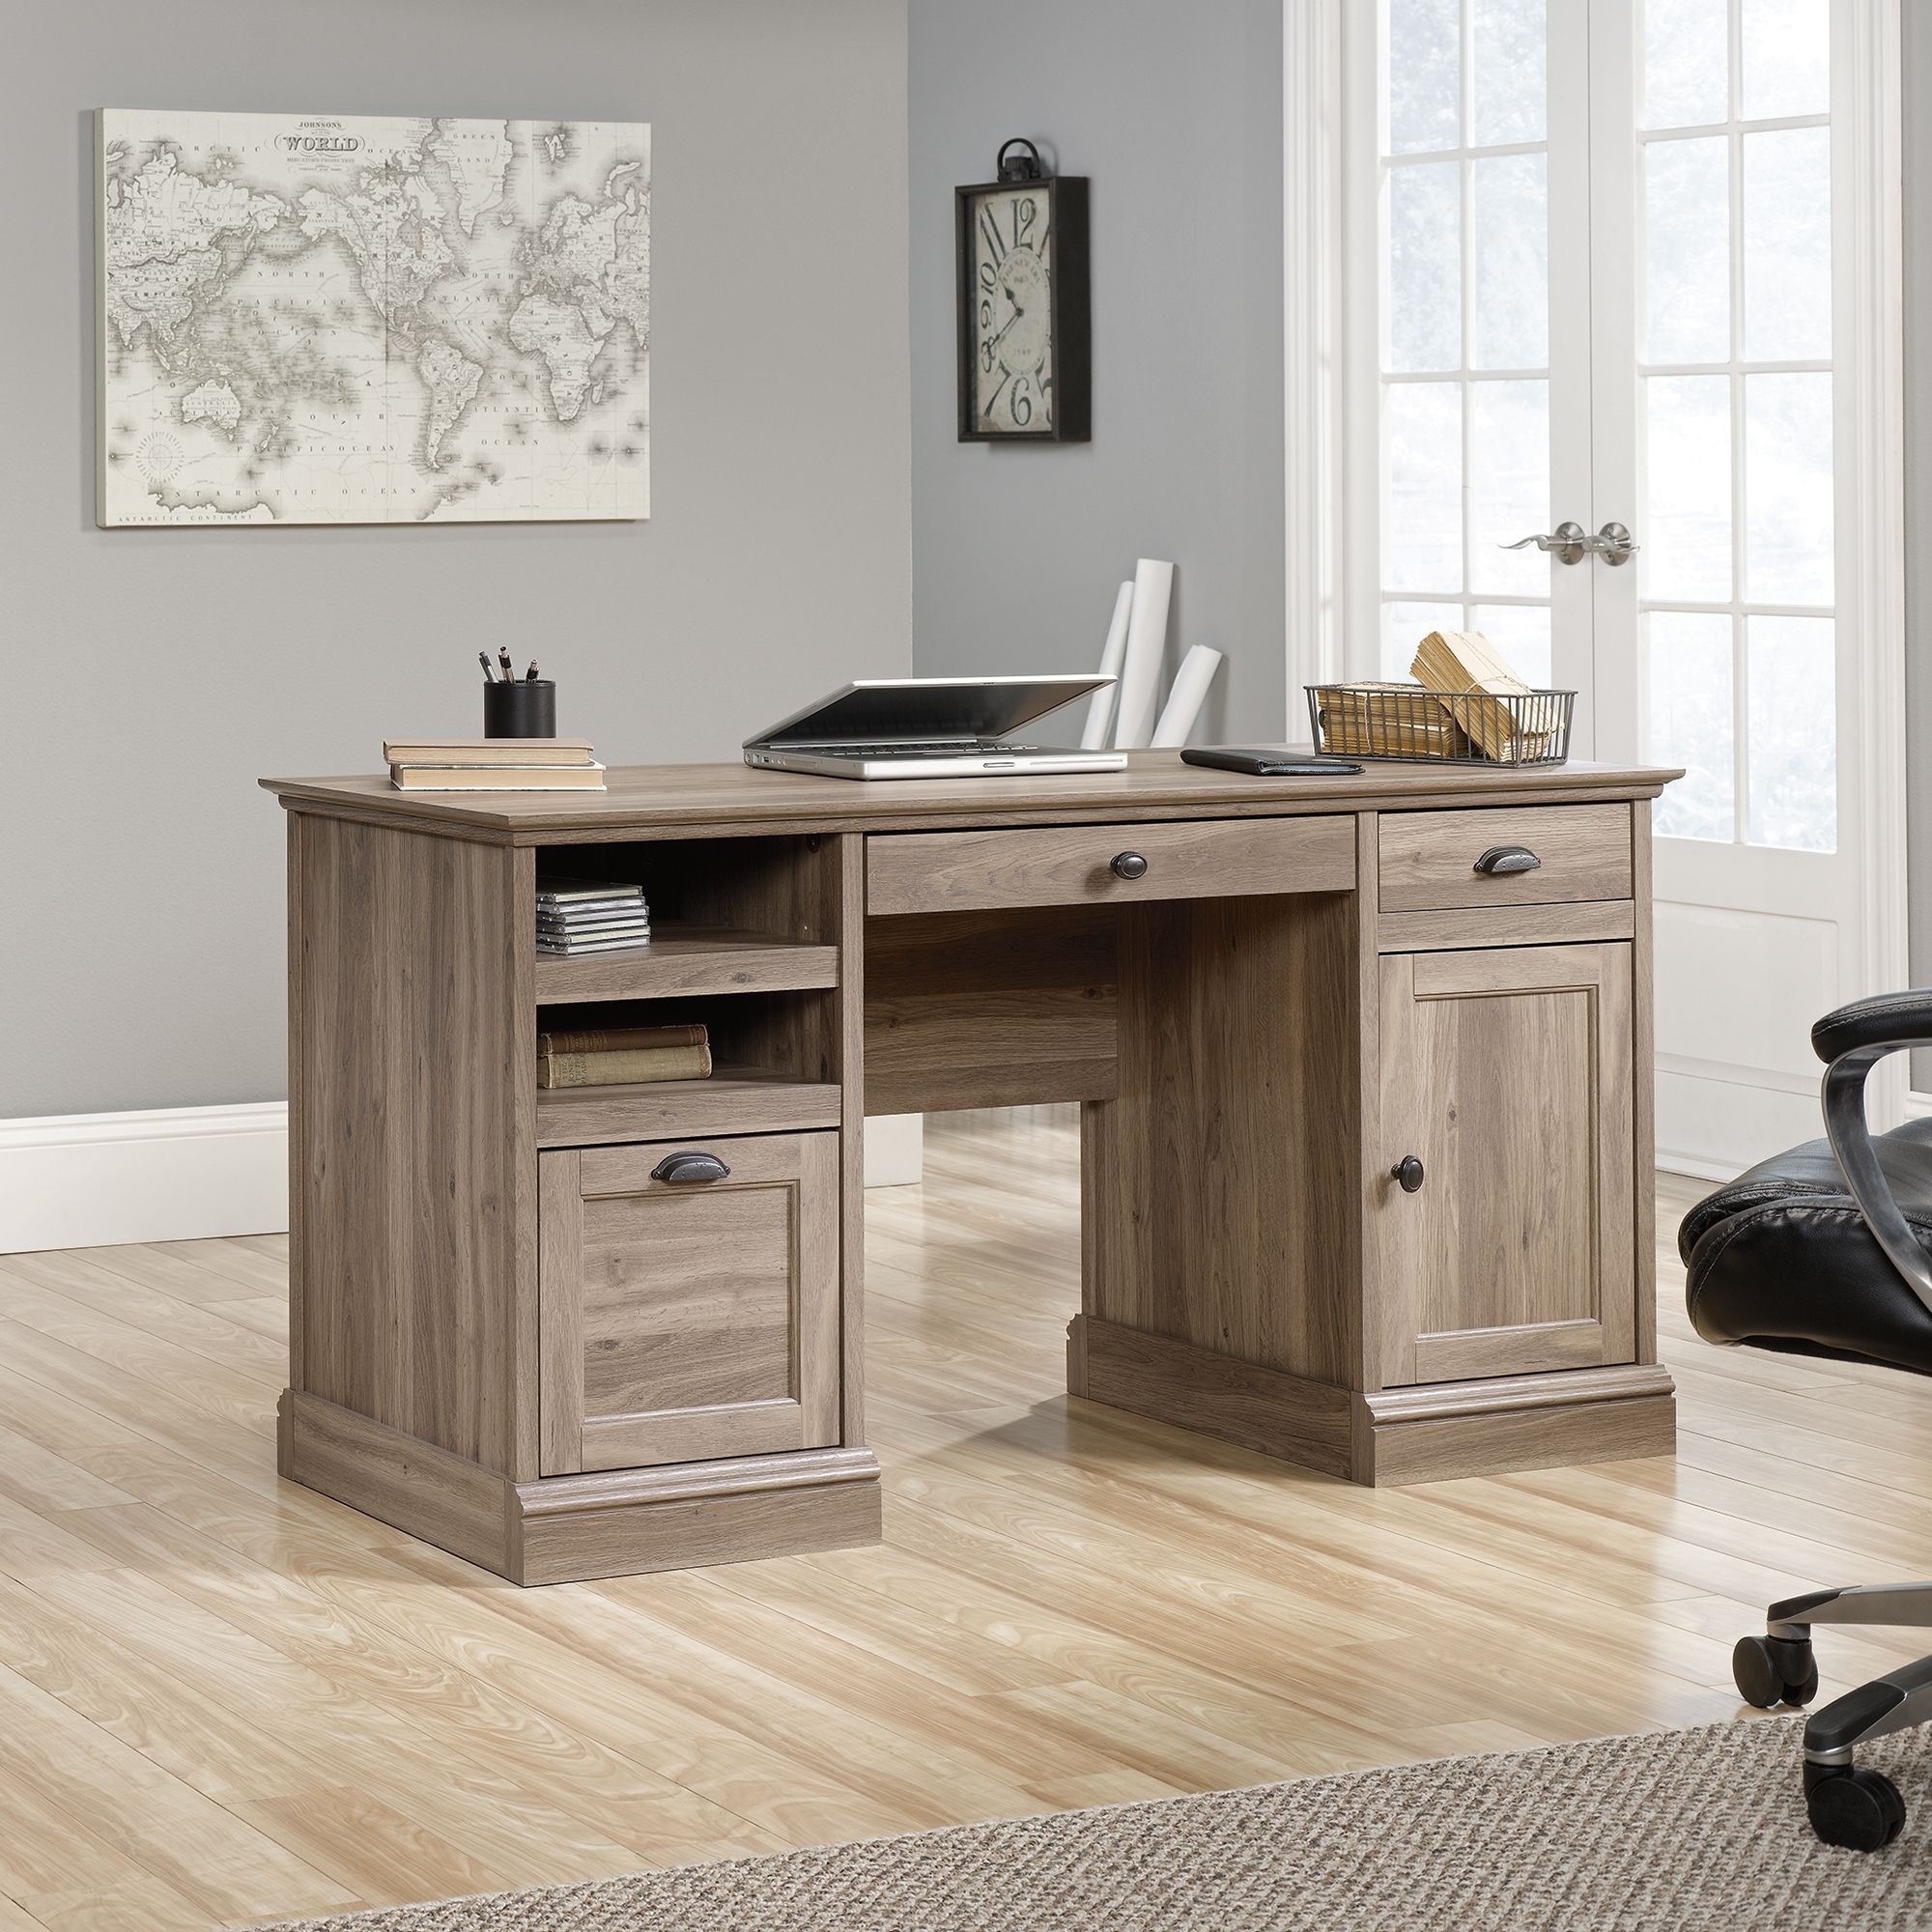 Barrister Lane Executive Desk with File